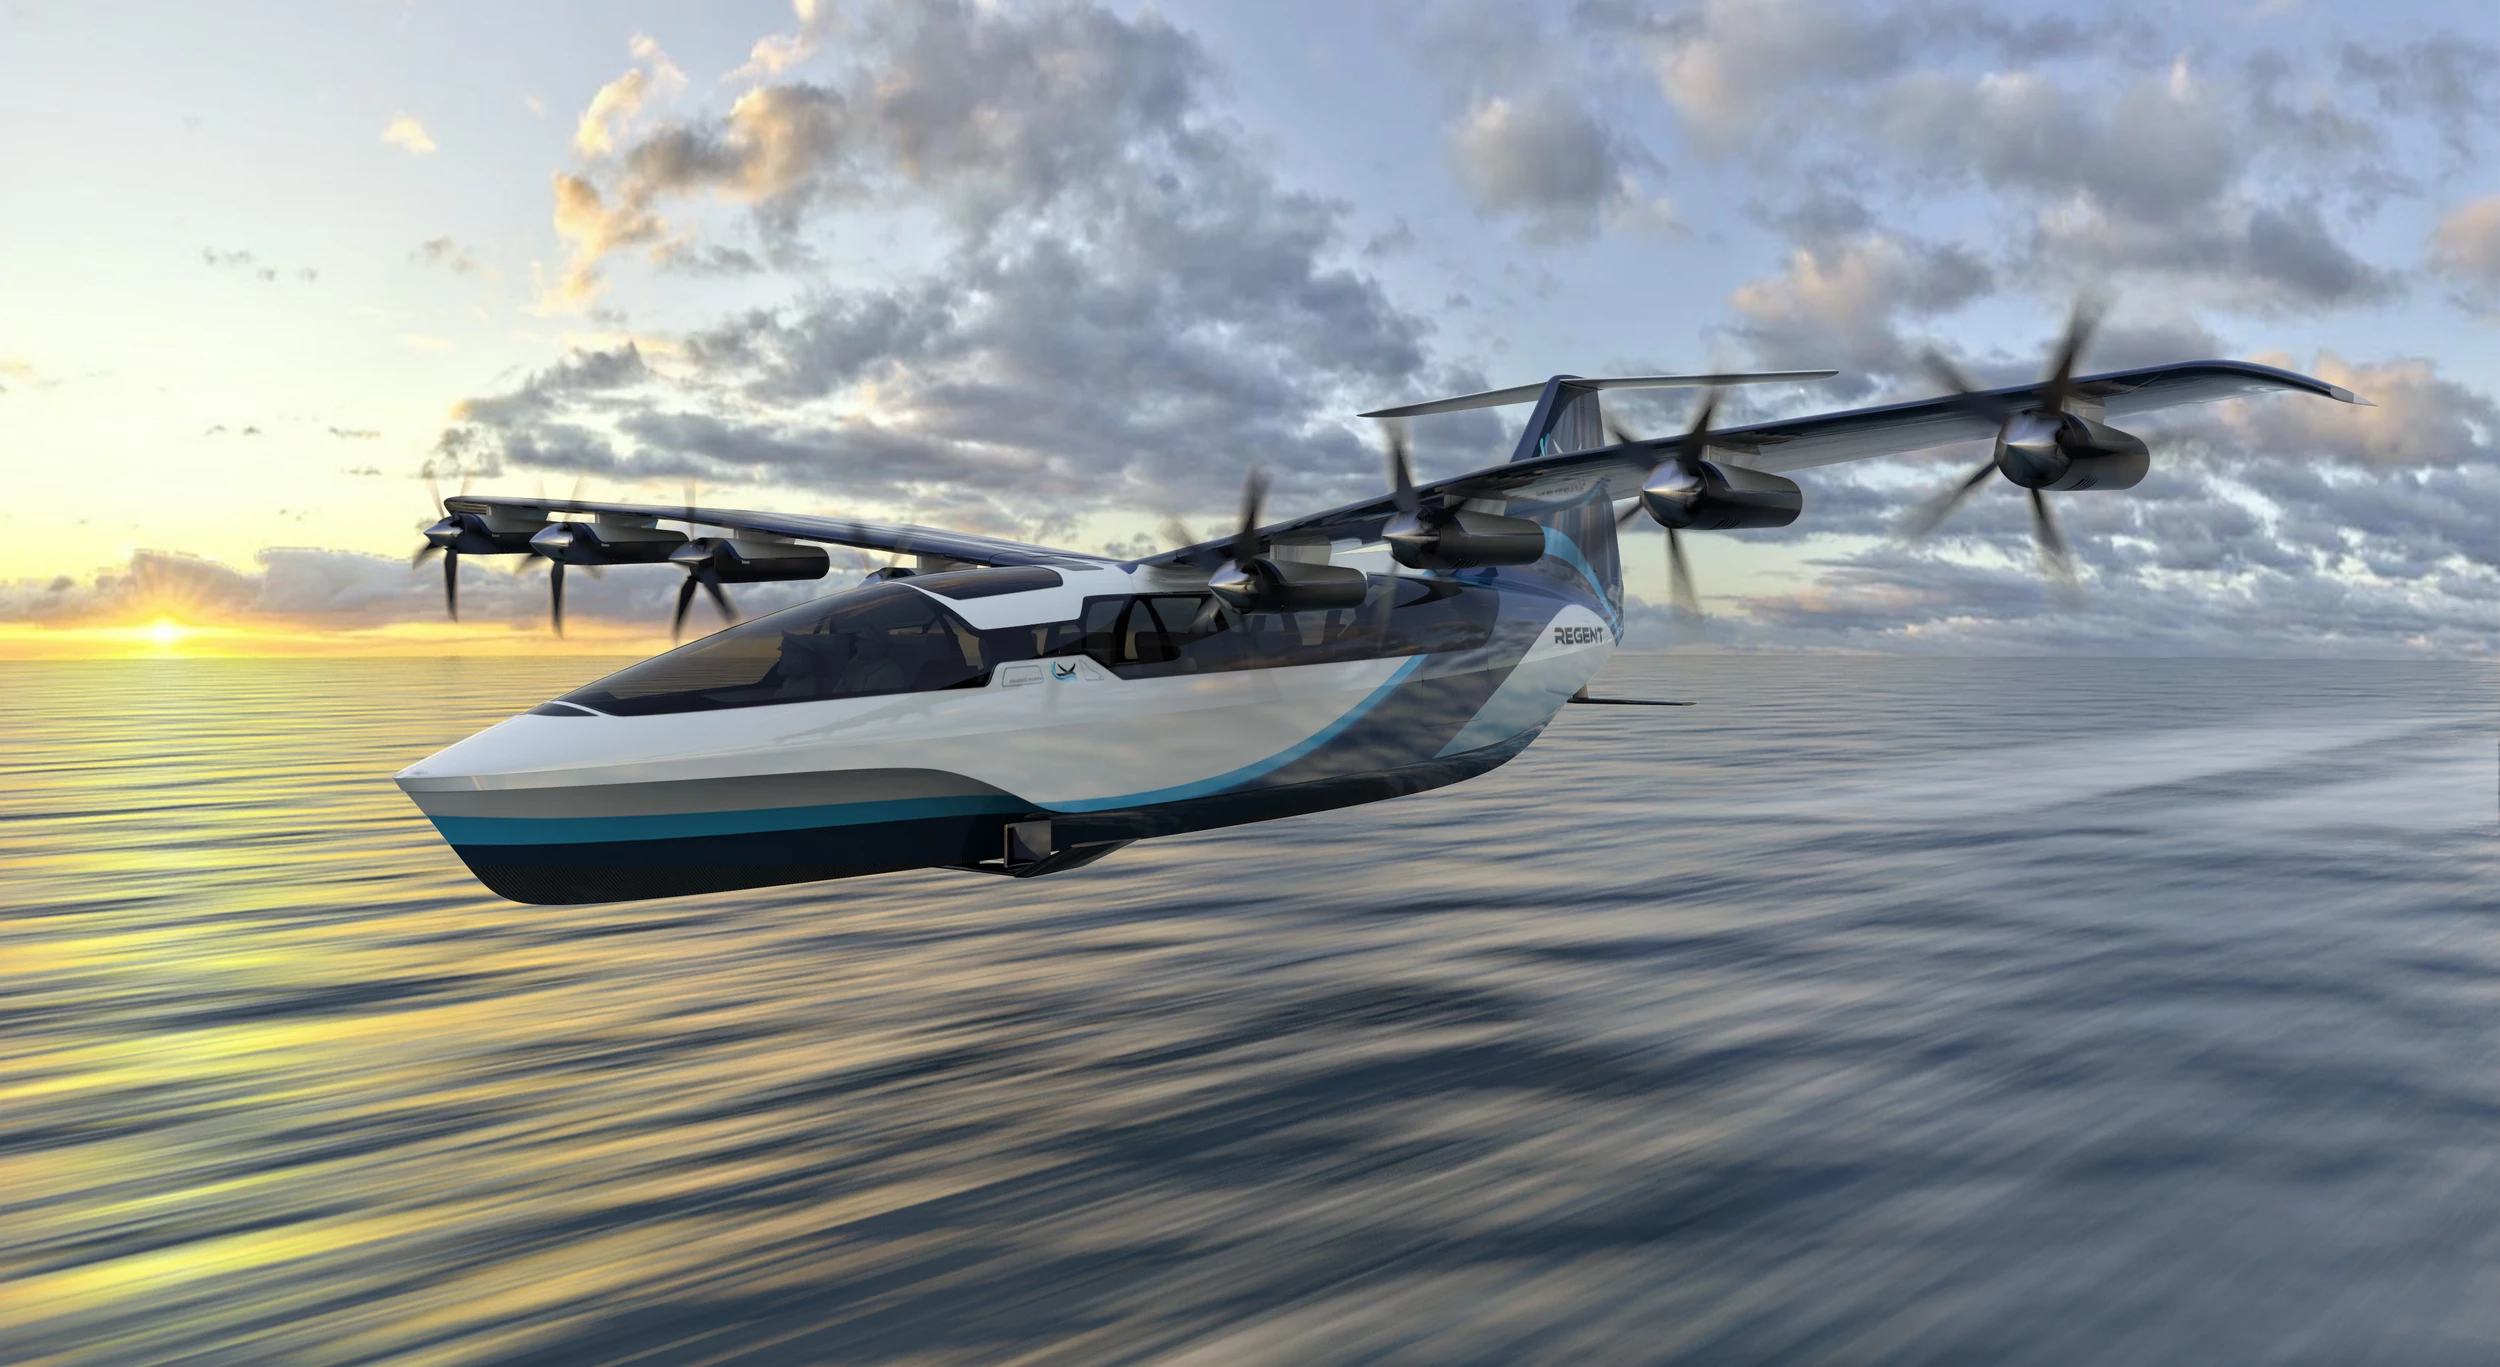 Invented in Boston Part Ferry, Part Plane Glides Above Water